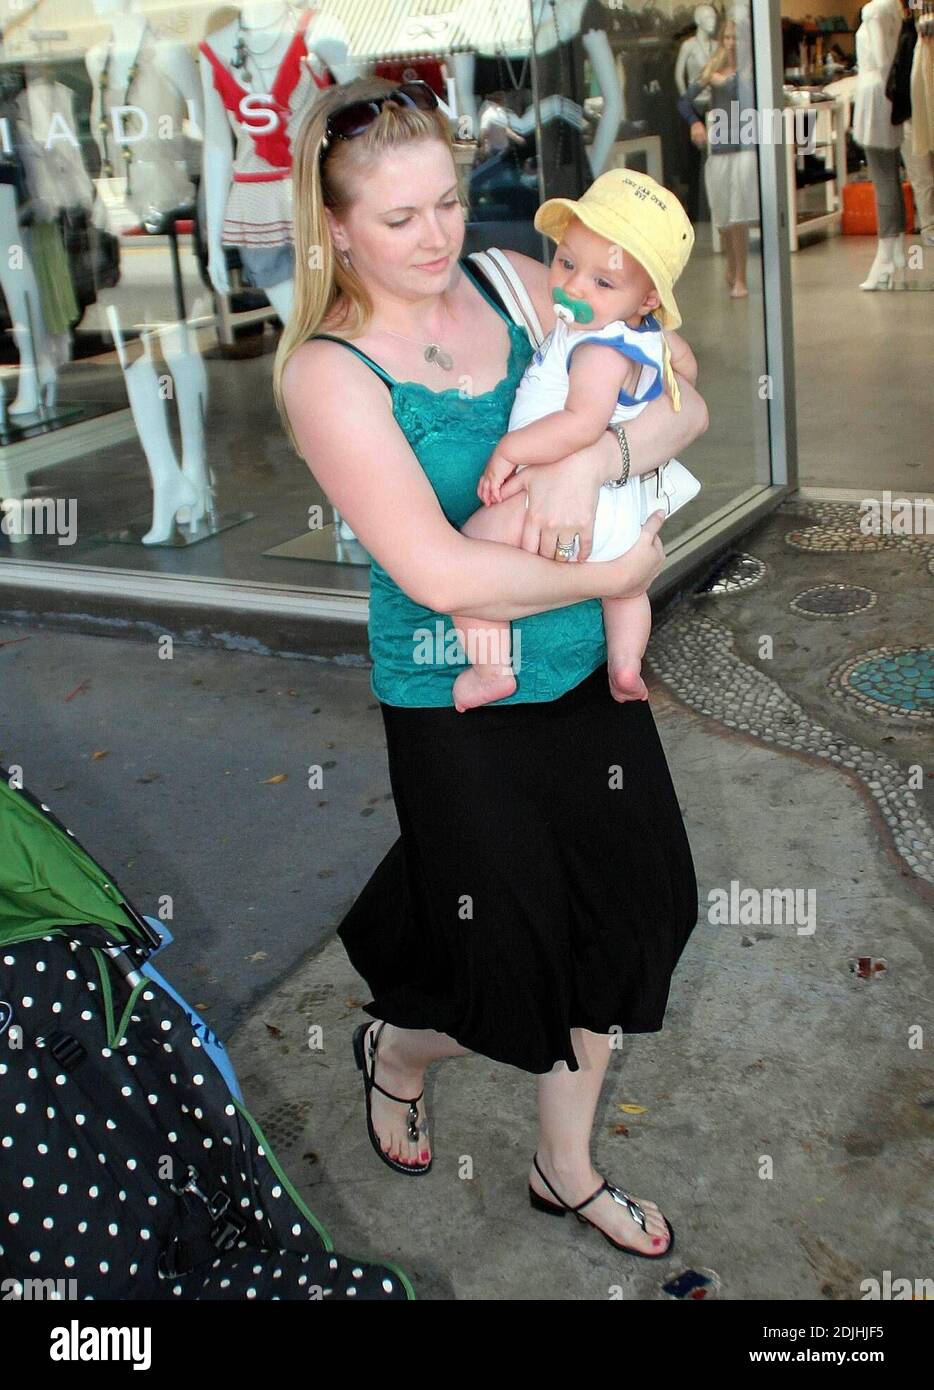 Actress Melissa Joan Hart, best known as the TV star of 'Sabrina the Teenage Witch,' went shopping with baby son at Kitson and Kitson Kids in LA with a friend. After shopping they retired to the News Cafe to escape the heat. 6/16/06 Stock Photo